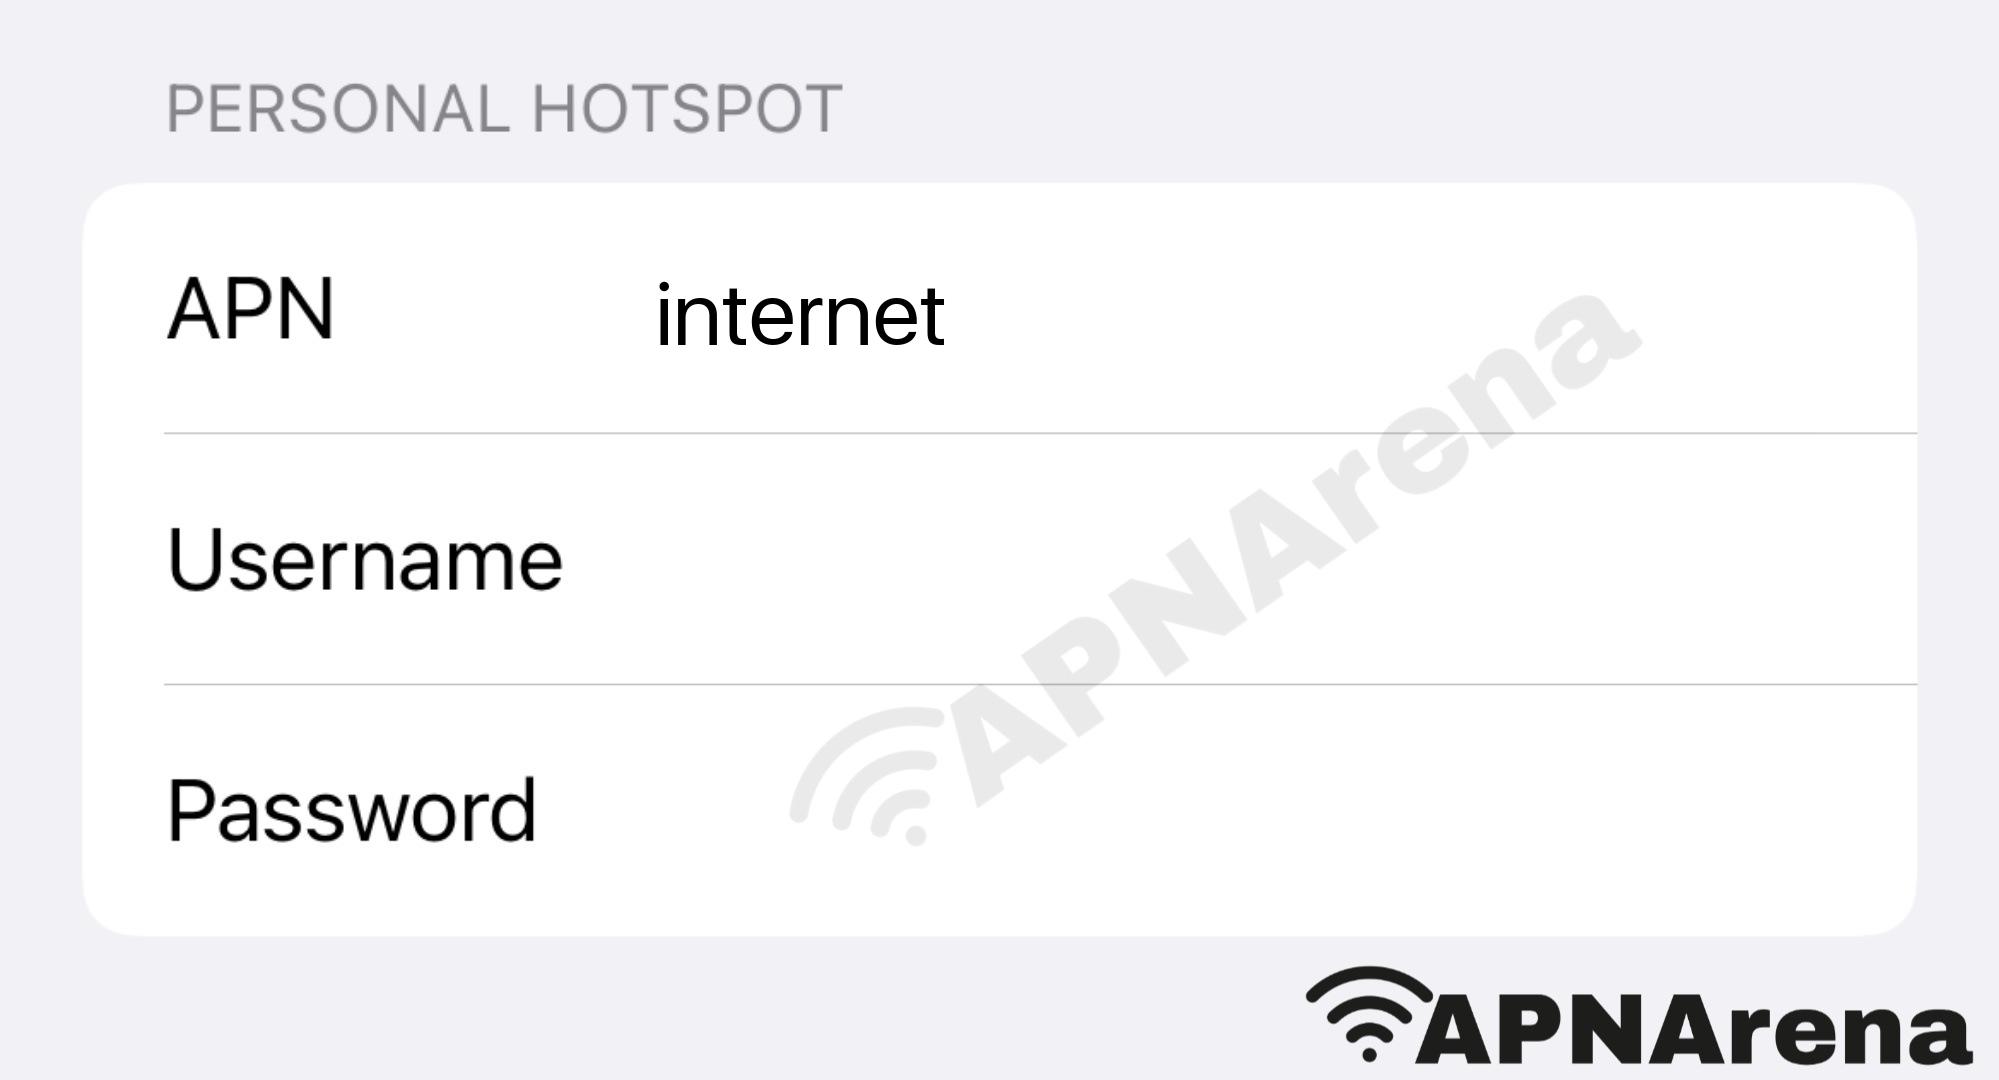 Flash Móvil Personal Hotspot Settings for iPhone